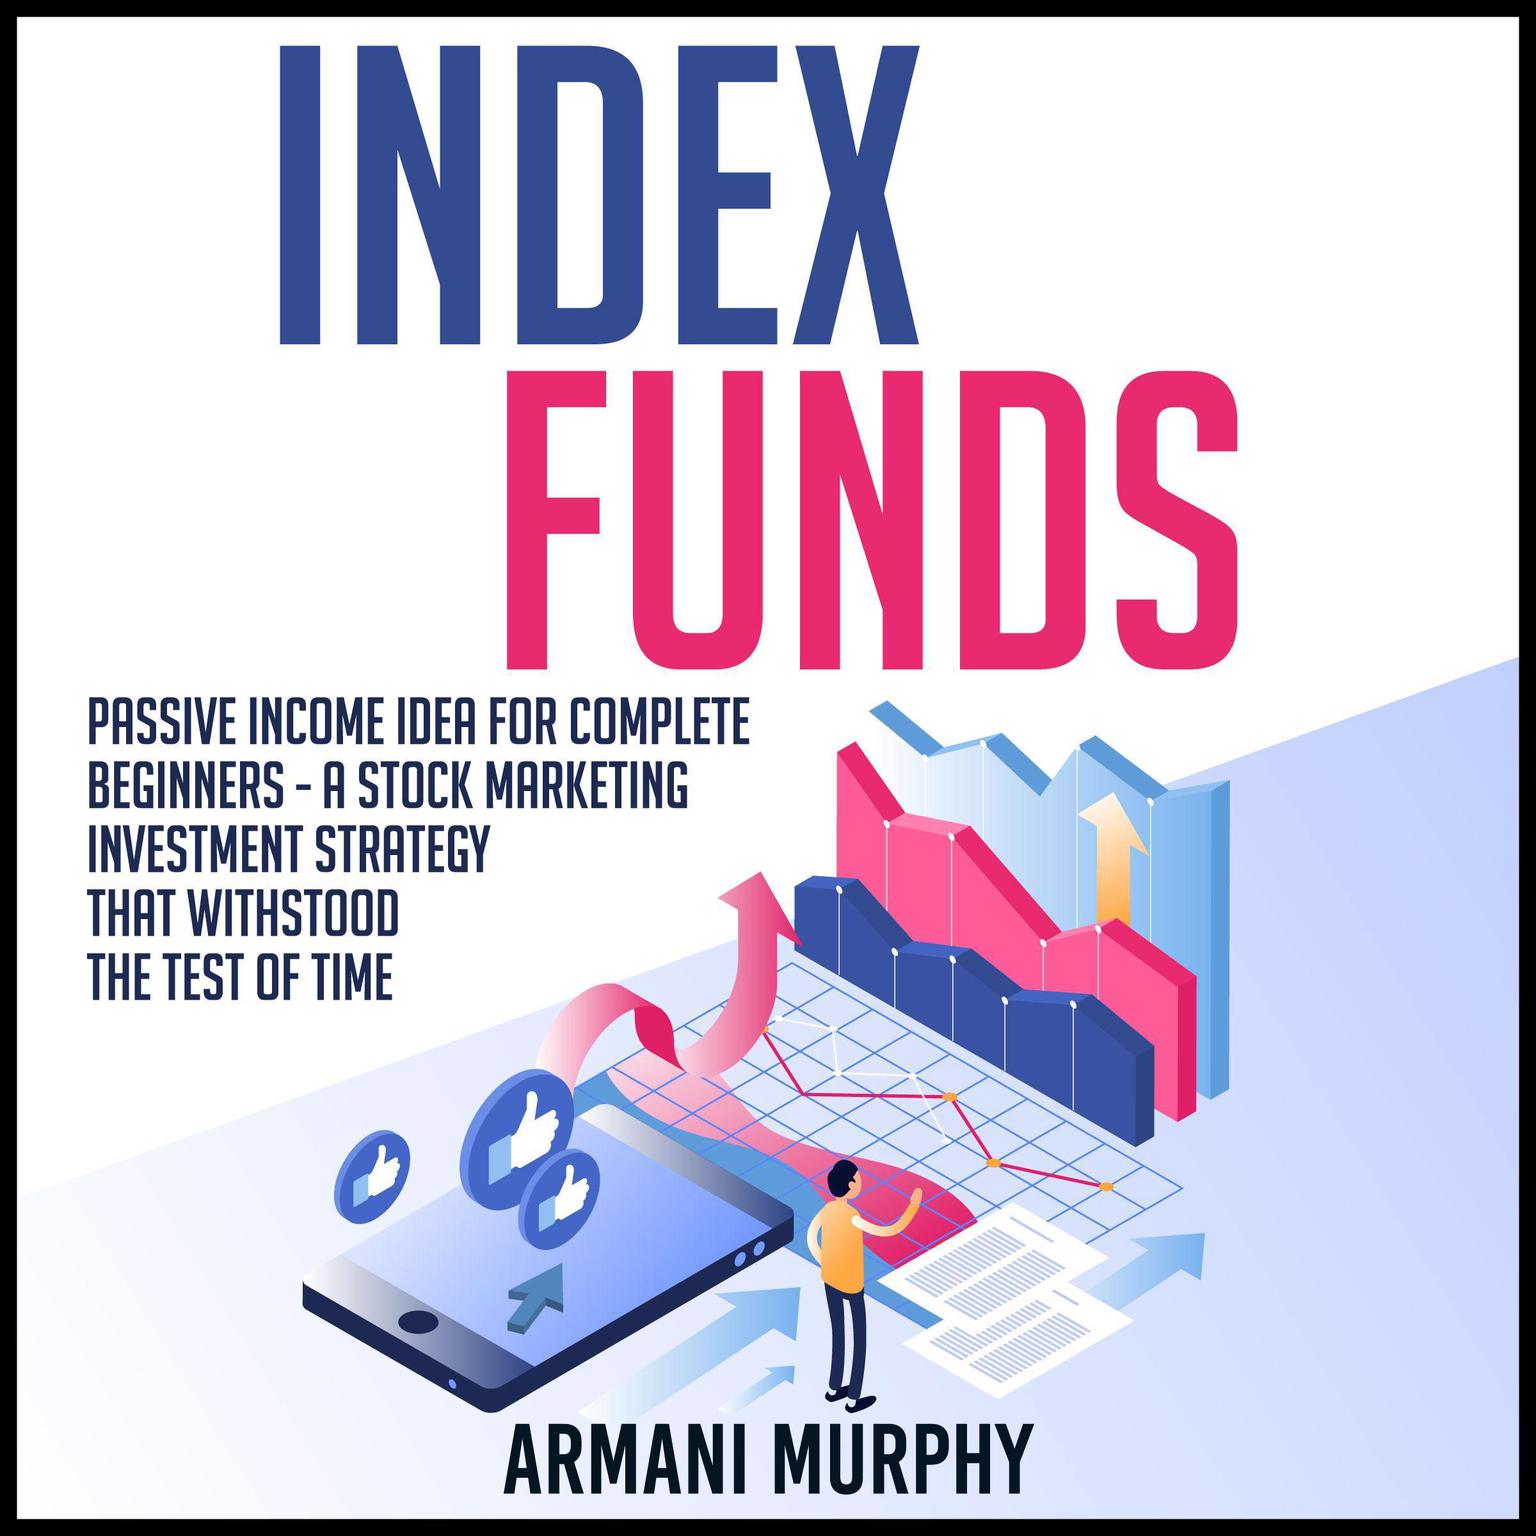 Index Funds Audiobook by Armani Murphy — Listen Now